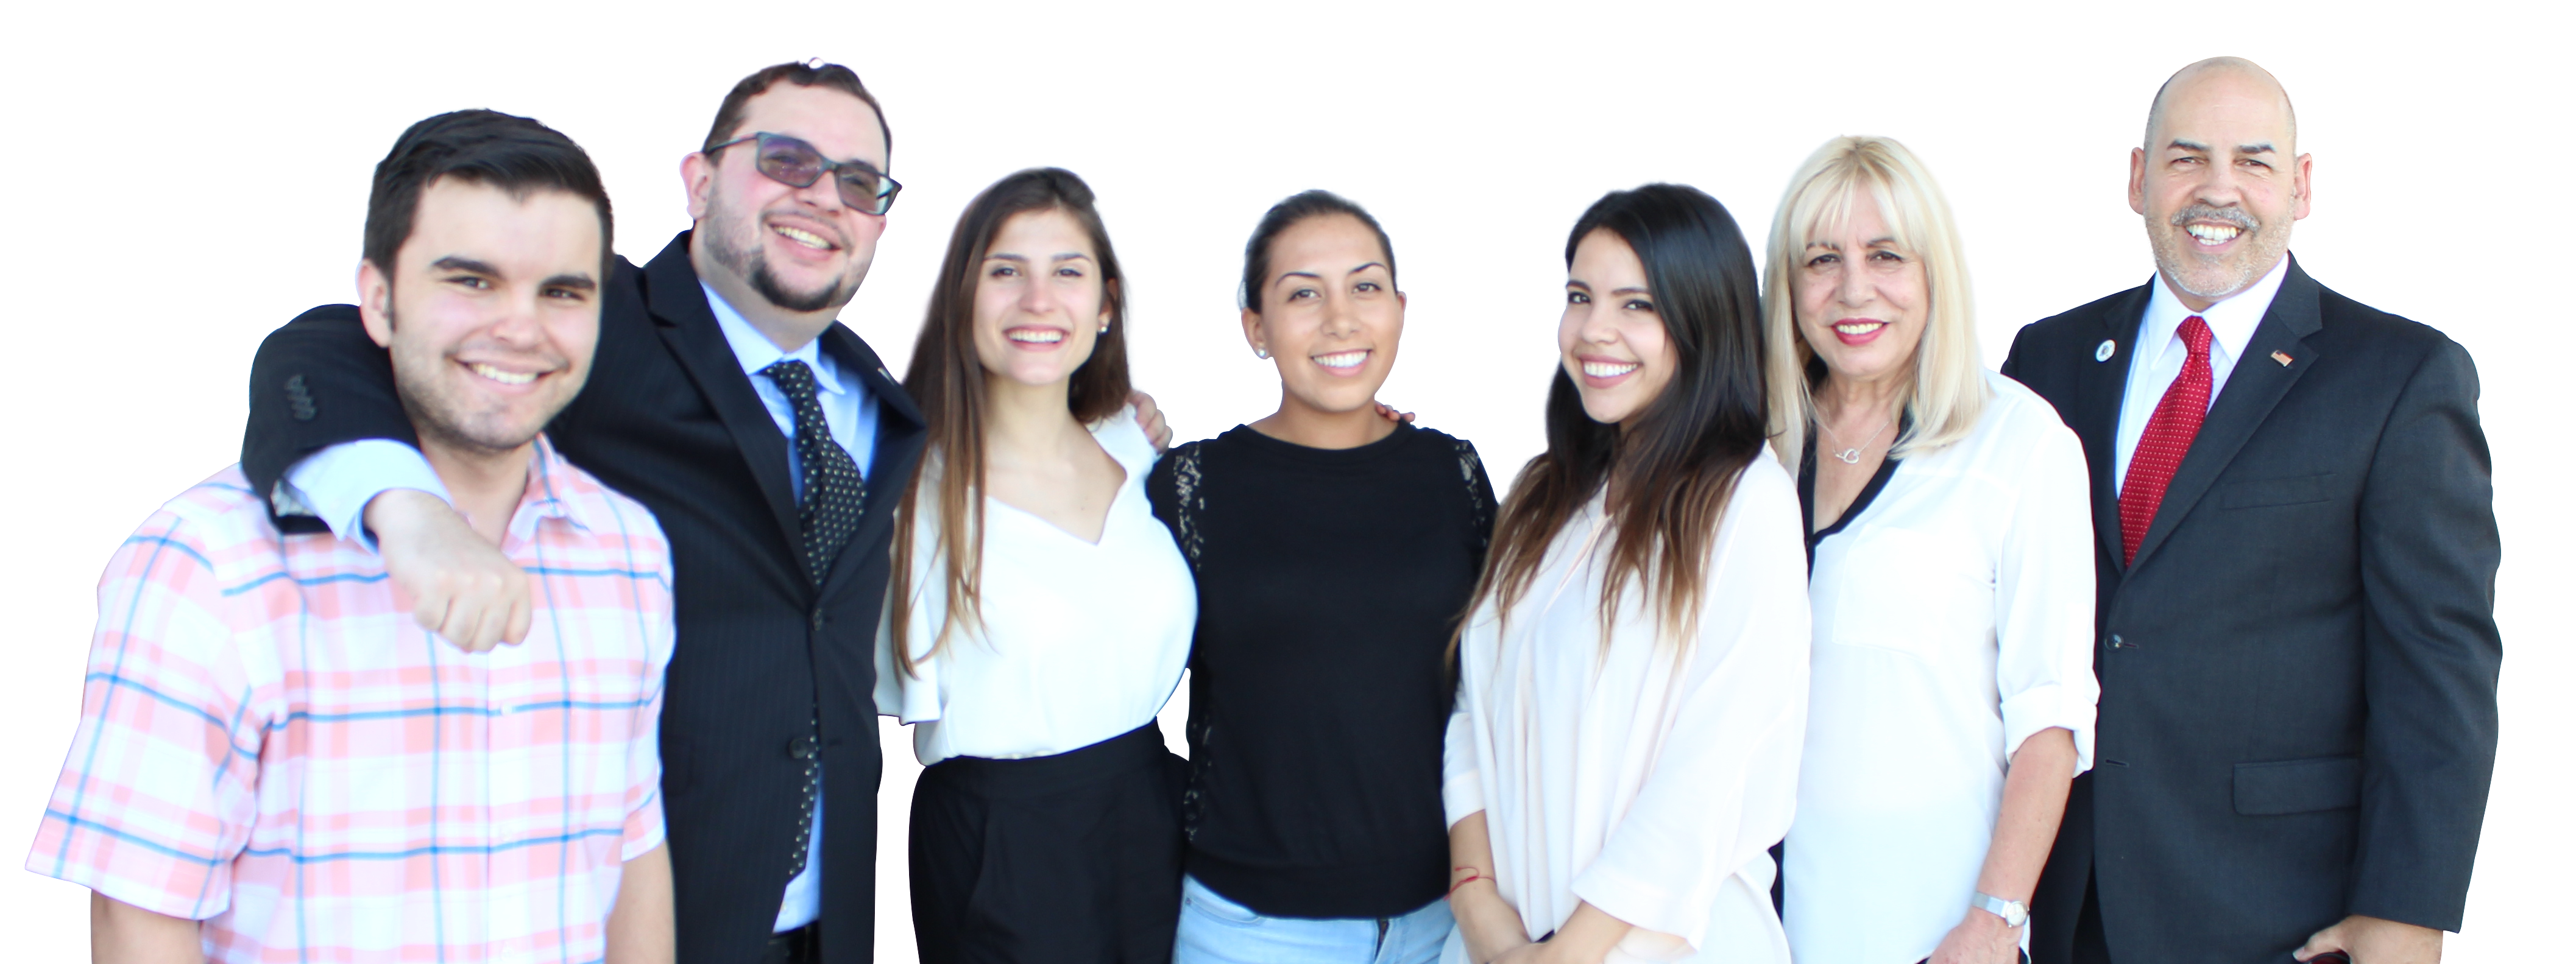 The Doral Chamber of Commerce Team.